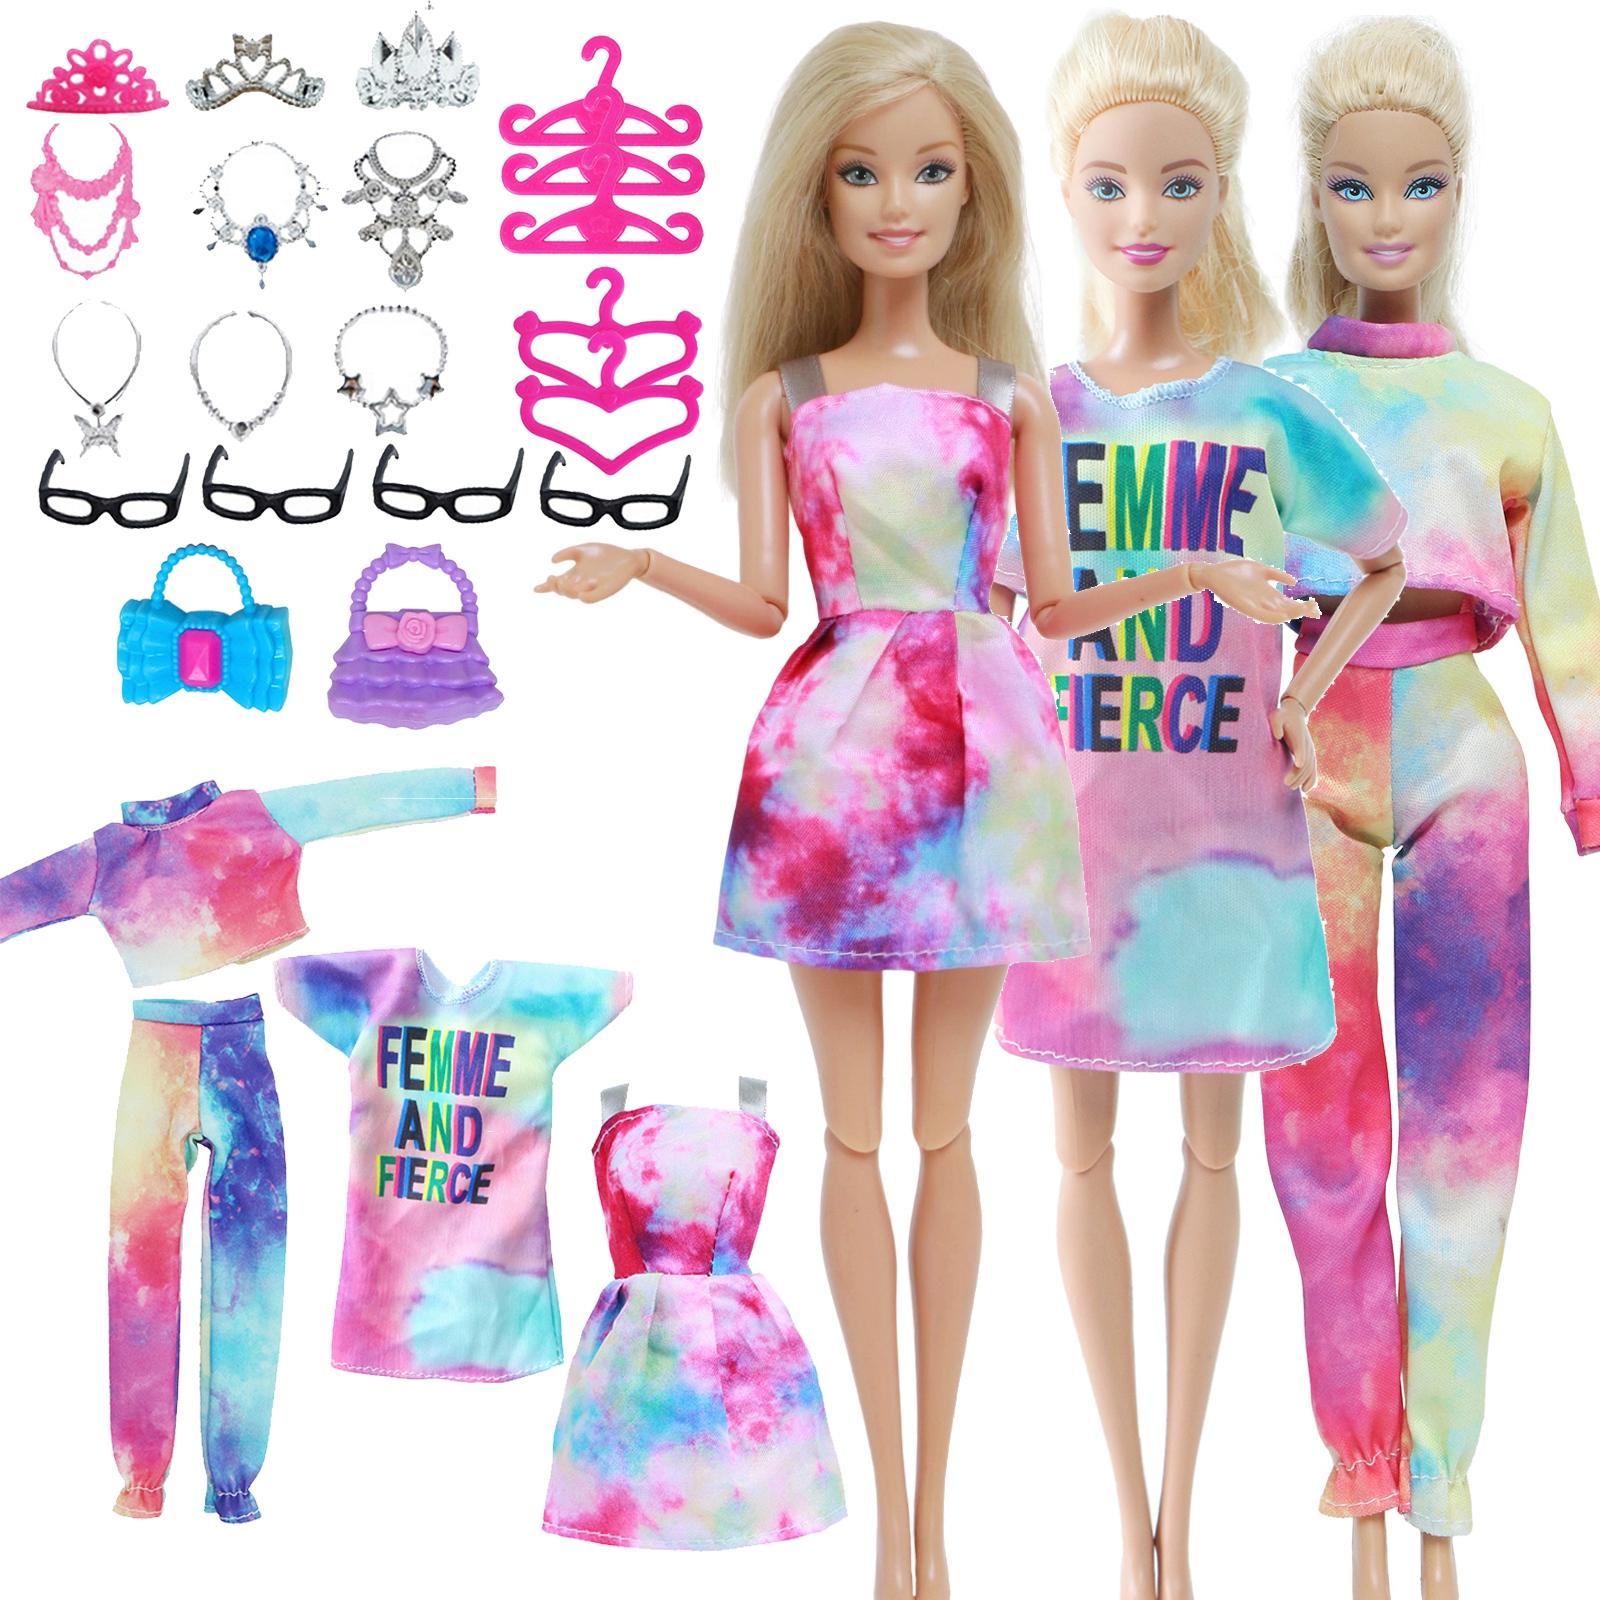 Funkid Toy 3 Doll Outfits +20 Pcs Accessories Dolls Clothes for Barbie Doll Lovely 1/6 Dollhouse Playset Girl Toy